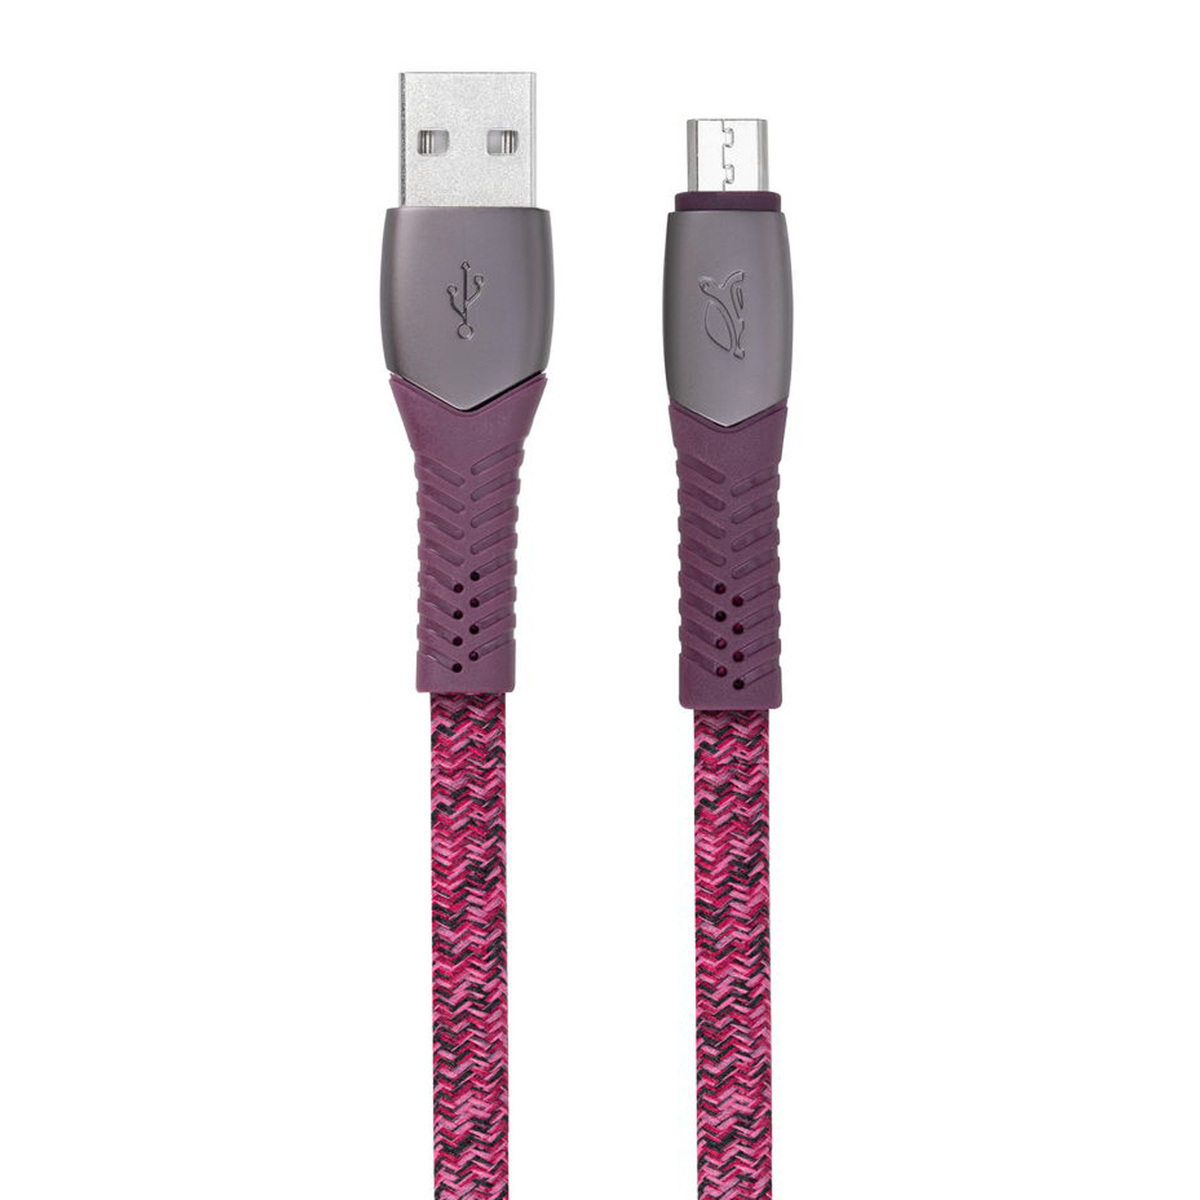 Rivacase Micro USB Cable, Red, 1.2 m, RD12